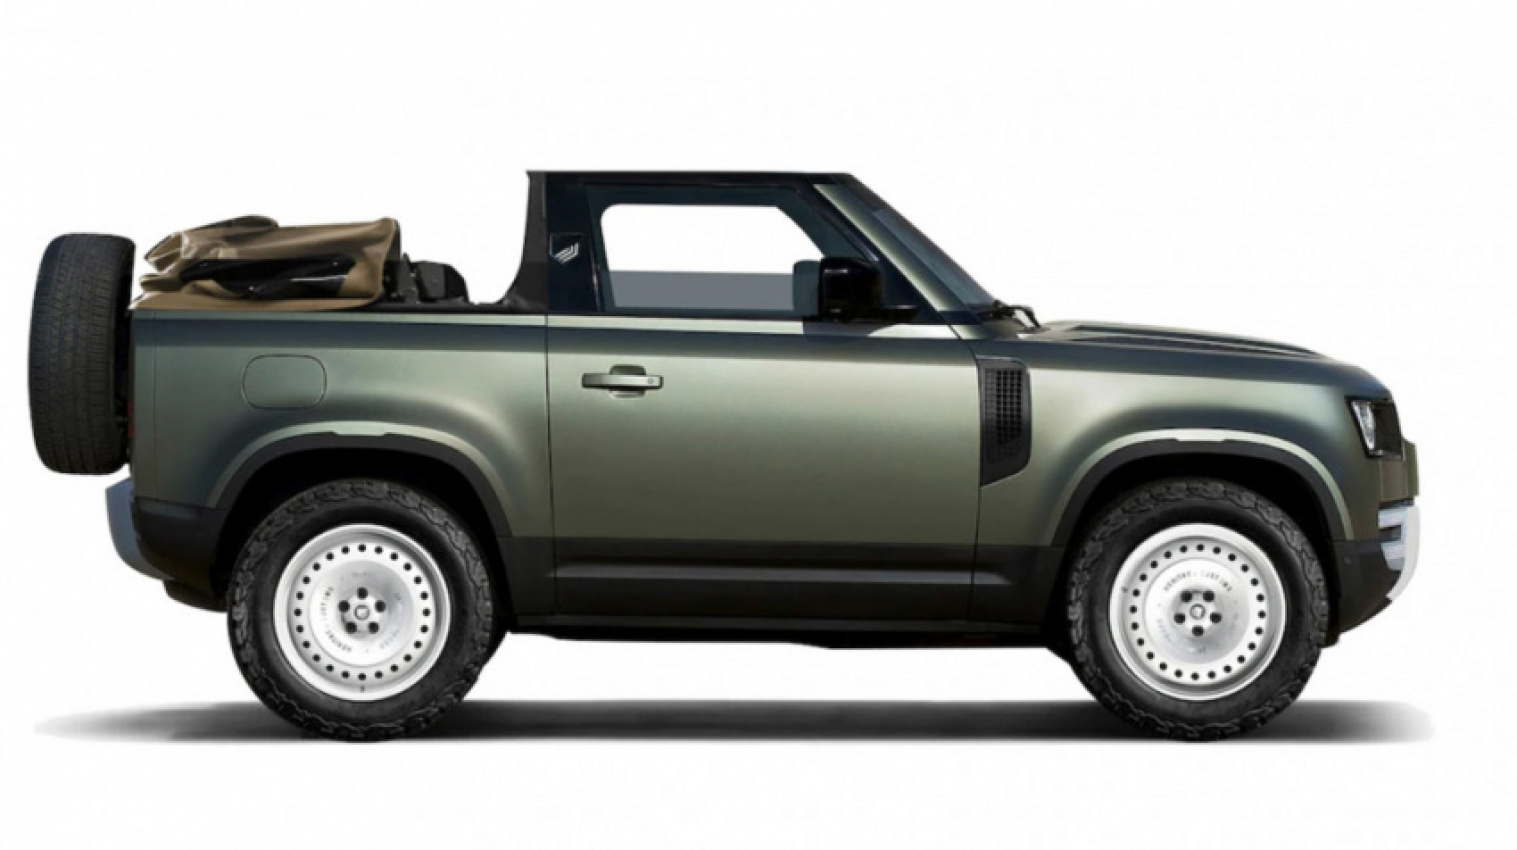 autos, cars, land rover, convertibles, land rover defender, land rover defender news, land rover news, luxury cars, modified, niels van roij design, suvs, coachbuilder prepares land rover defender convertible